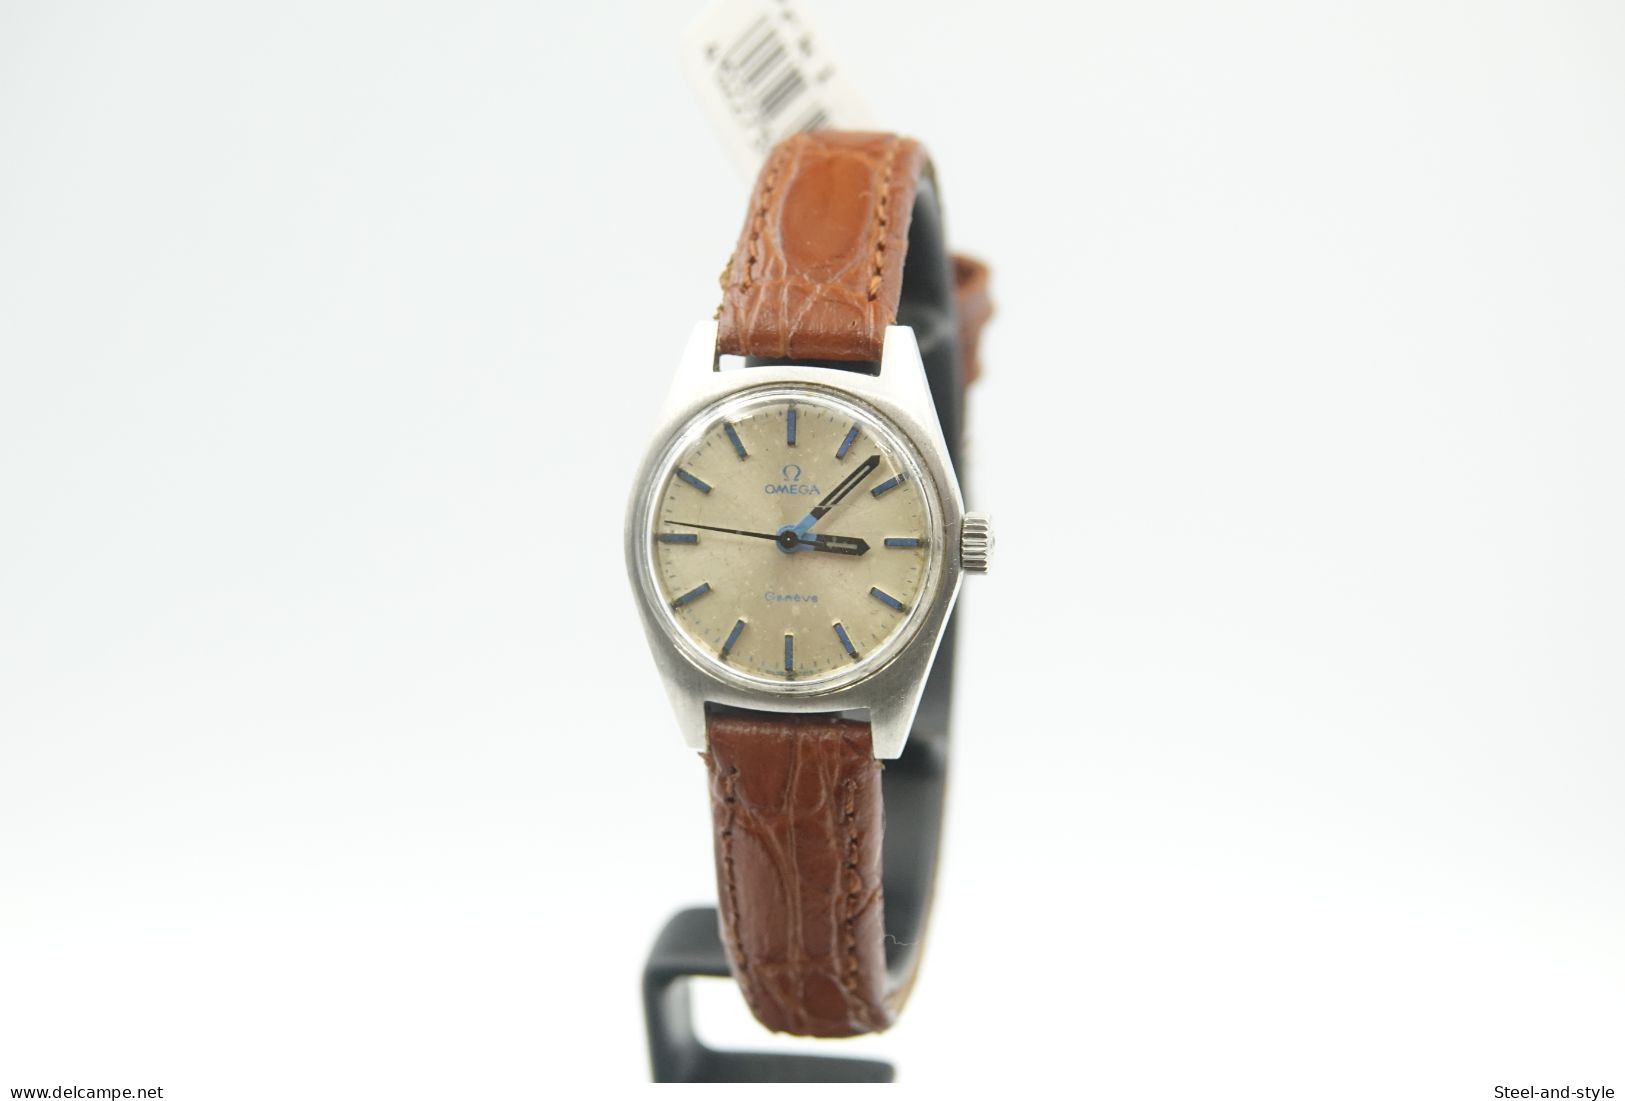 watches : OMEGA GENEVE REF. 535.014 RARE SILVER DIAL VARIANT - 1960-69's - original - running - excelent